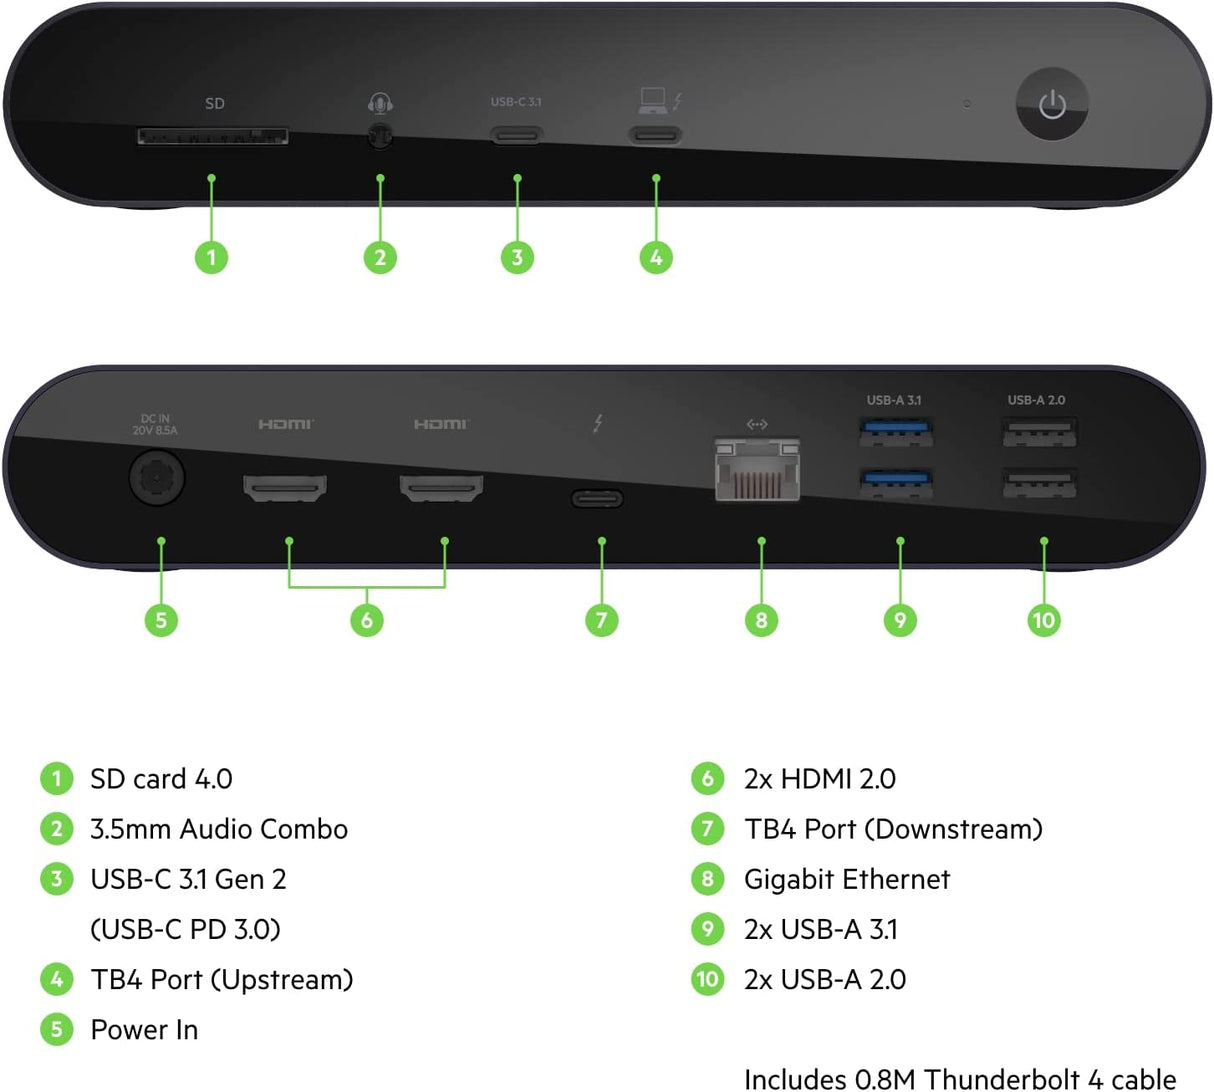 Belkin Thunderbolt 4 Dock Pro, Single 8K @ 60hz, Dual 4K Display Compatible, 2 x Thunderbolt 4 Port, 2 x HDMI Port, 90W Power Delivery PD, Audio in/Out, Compatible with MacBook Pro, XPS, and More